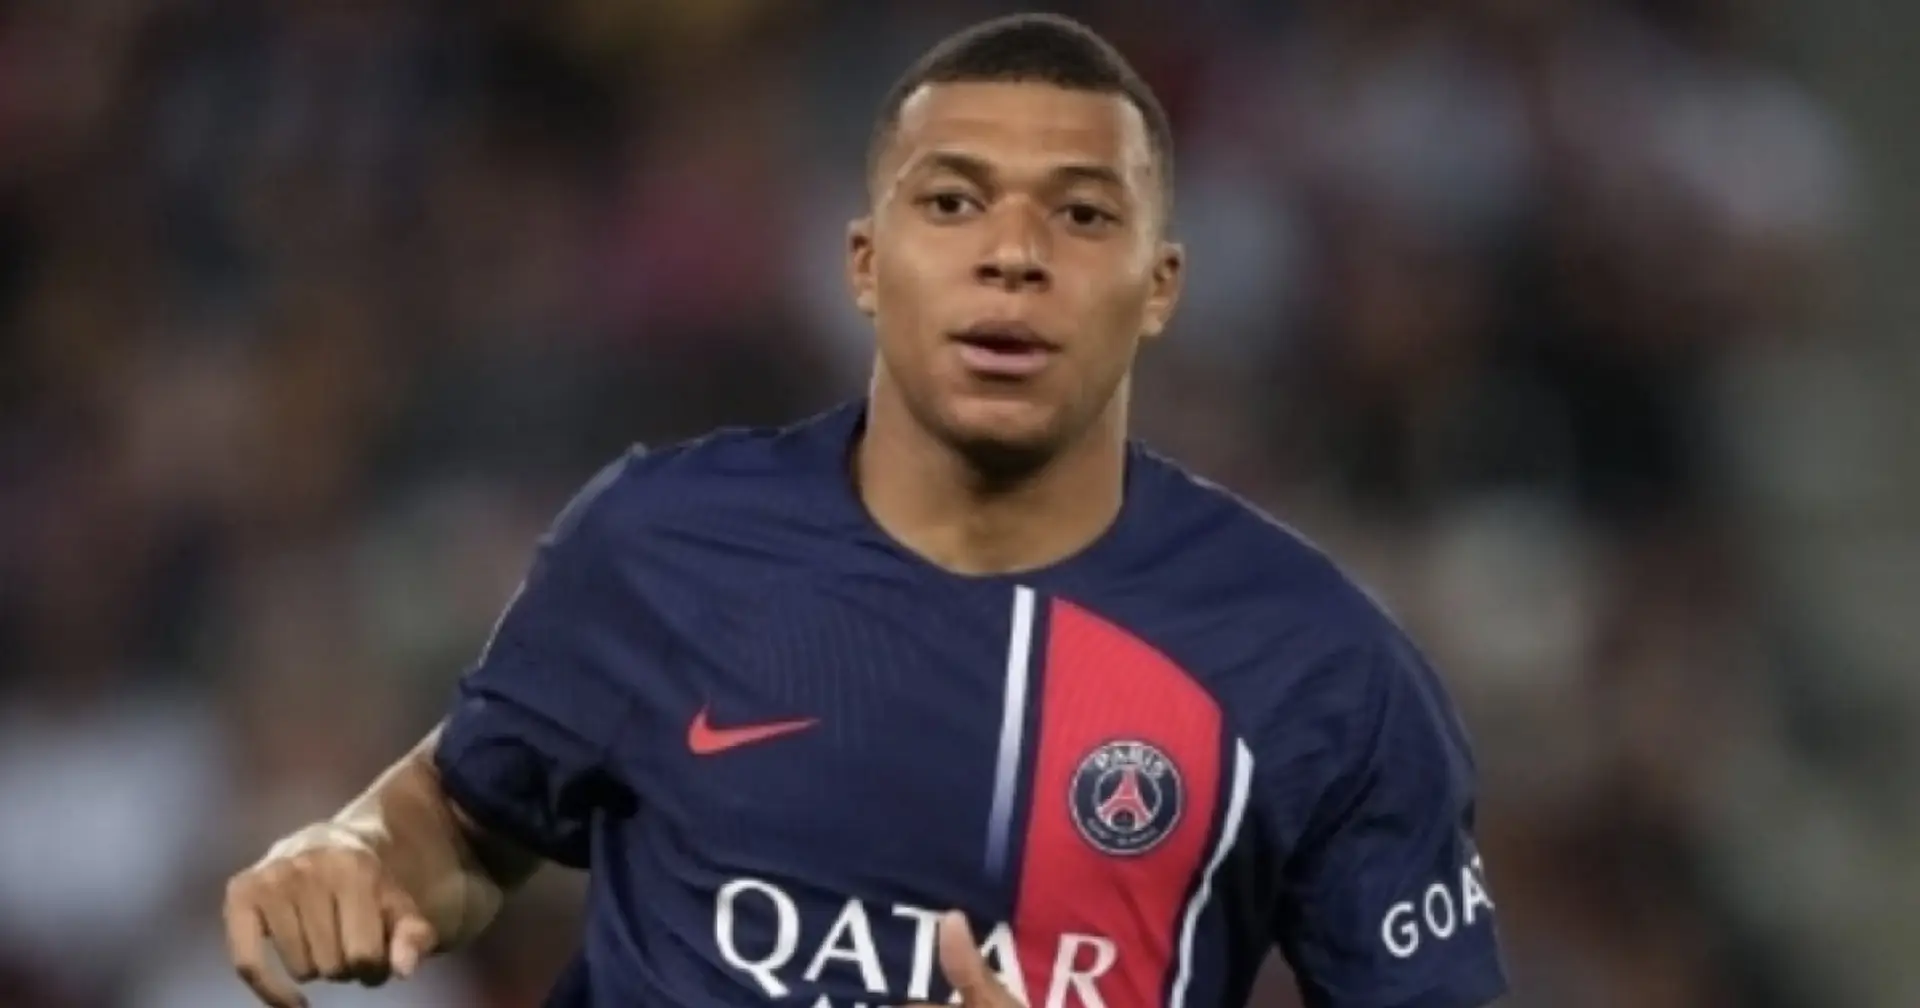 Some members of Kylian Mbappe entourage unconvinced by Real Madrid offer – top source